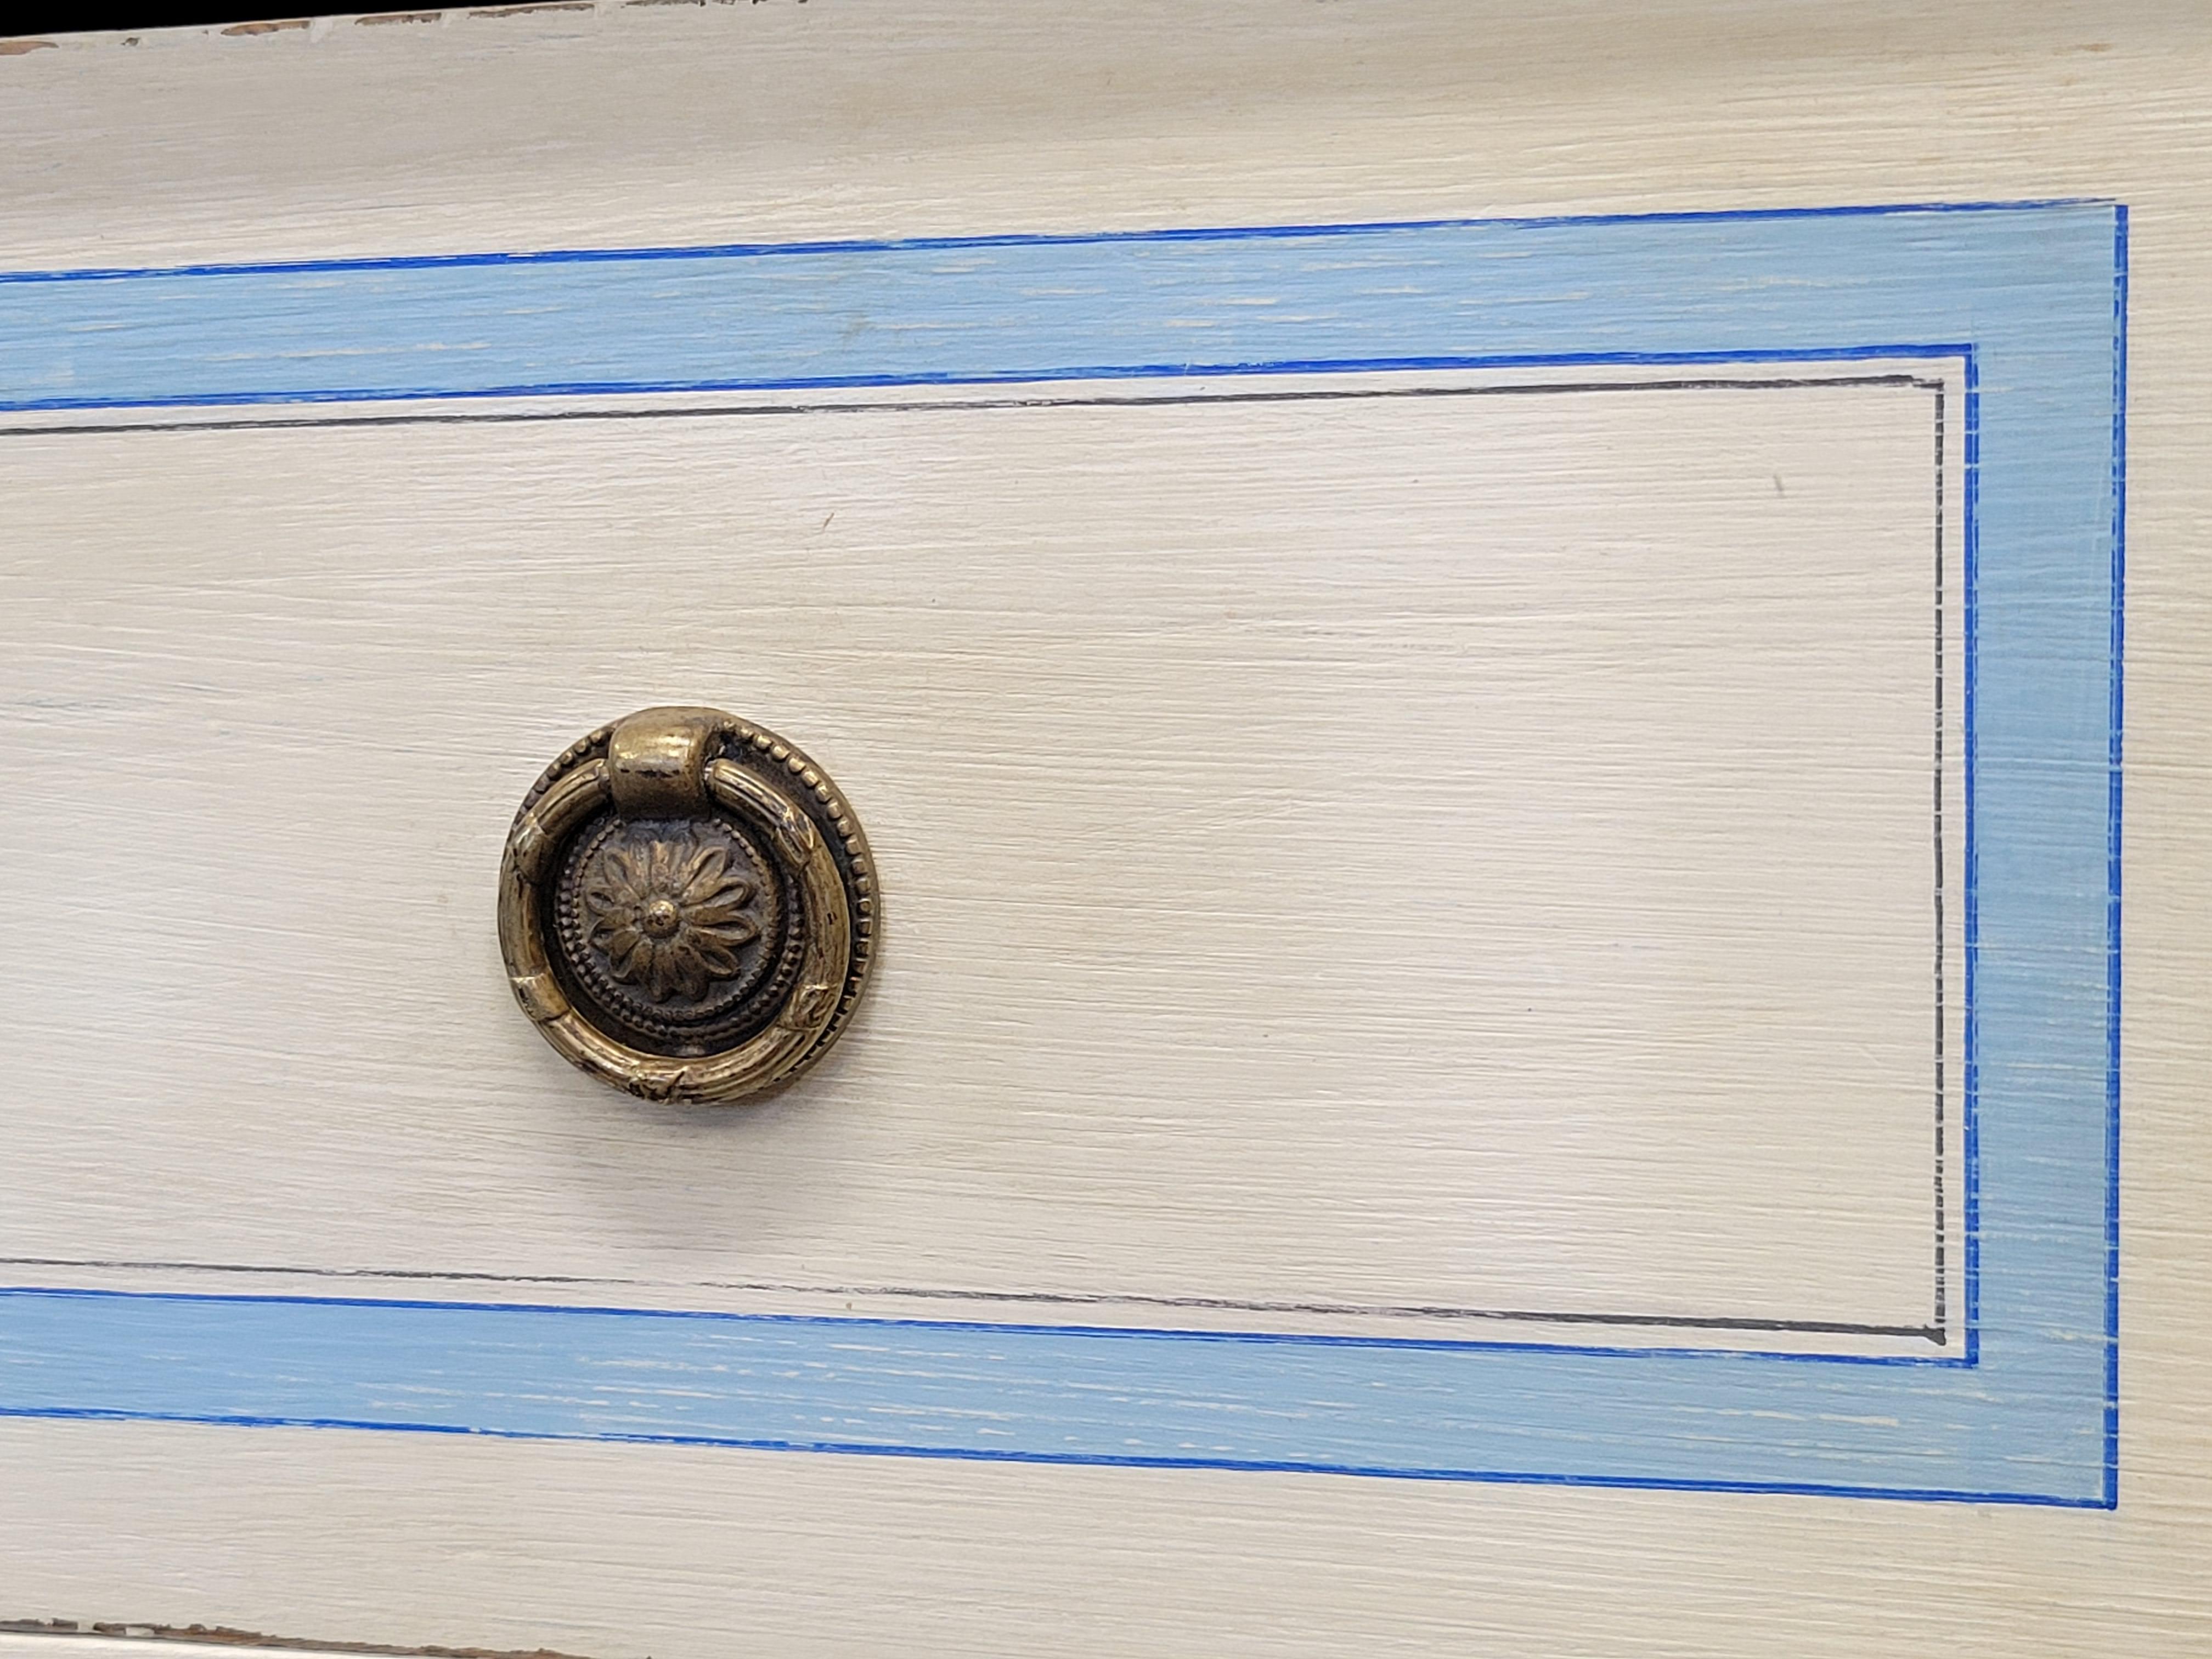 Hand-Crafted Antique Pine Chest of Drawers Painted With Blue French Line Motif on White